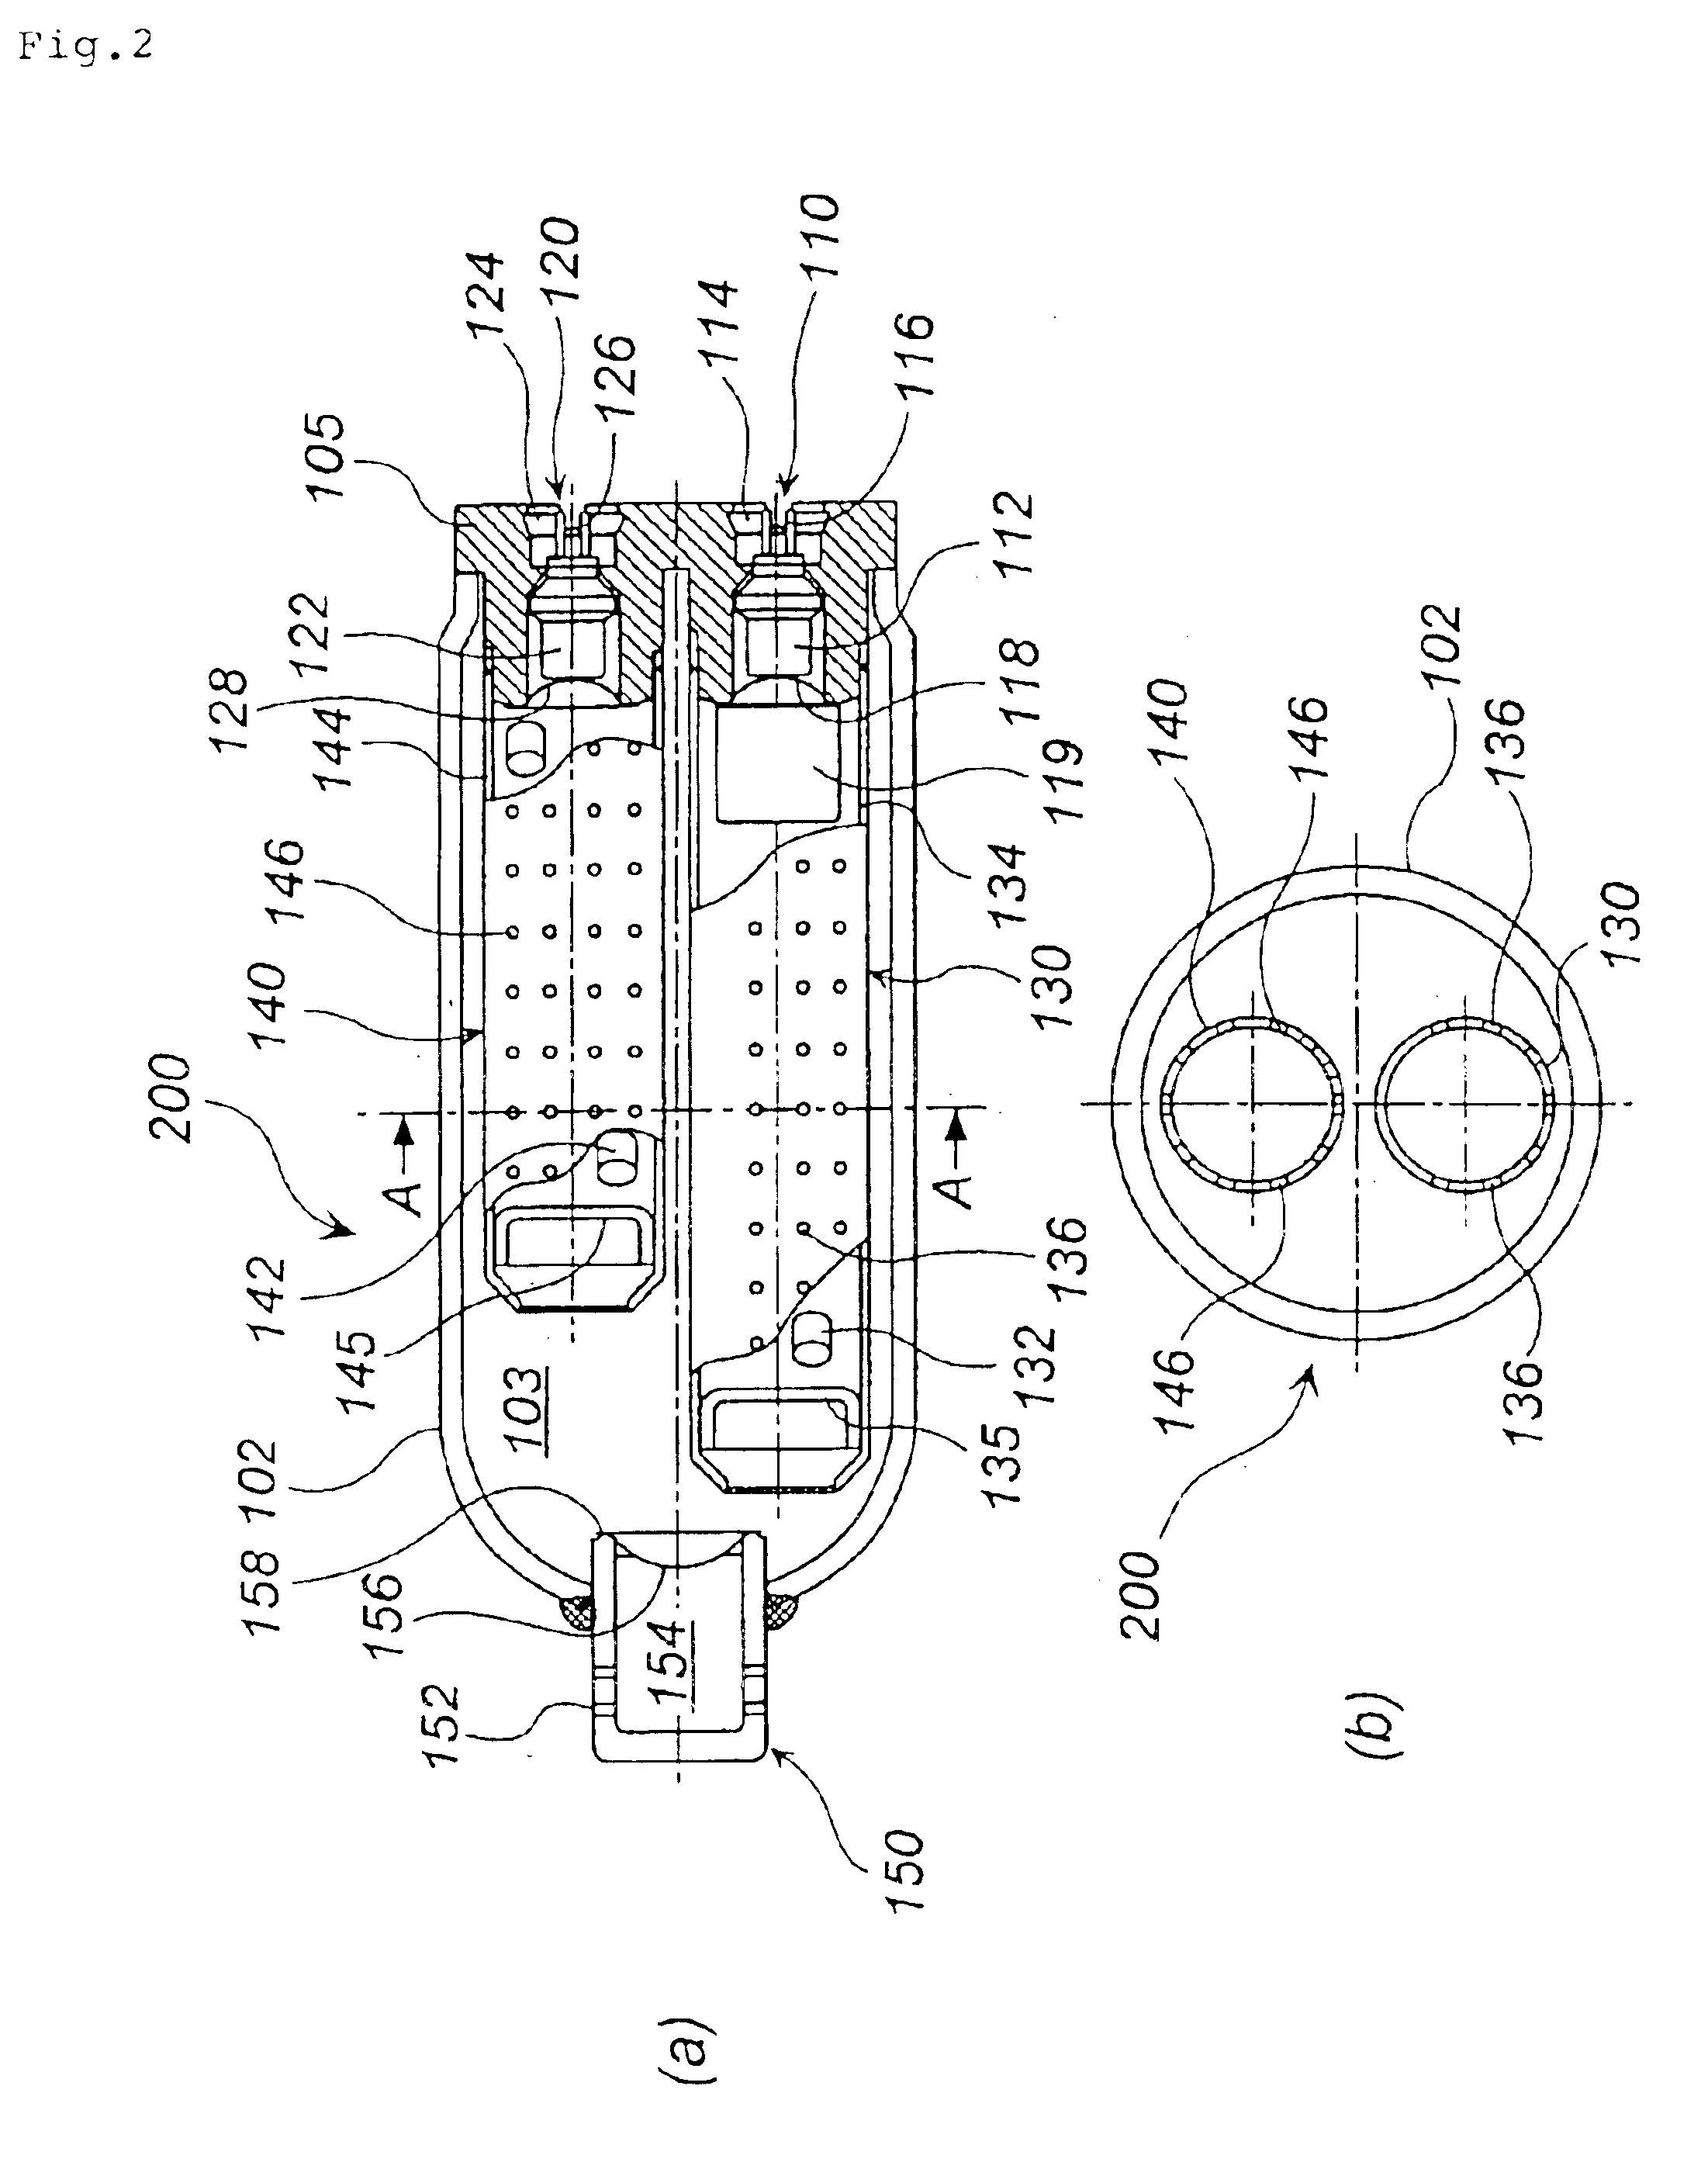 Multistage inflating-type hybrid inflator